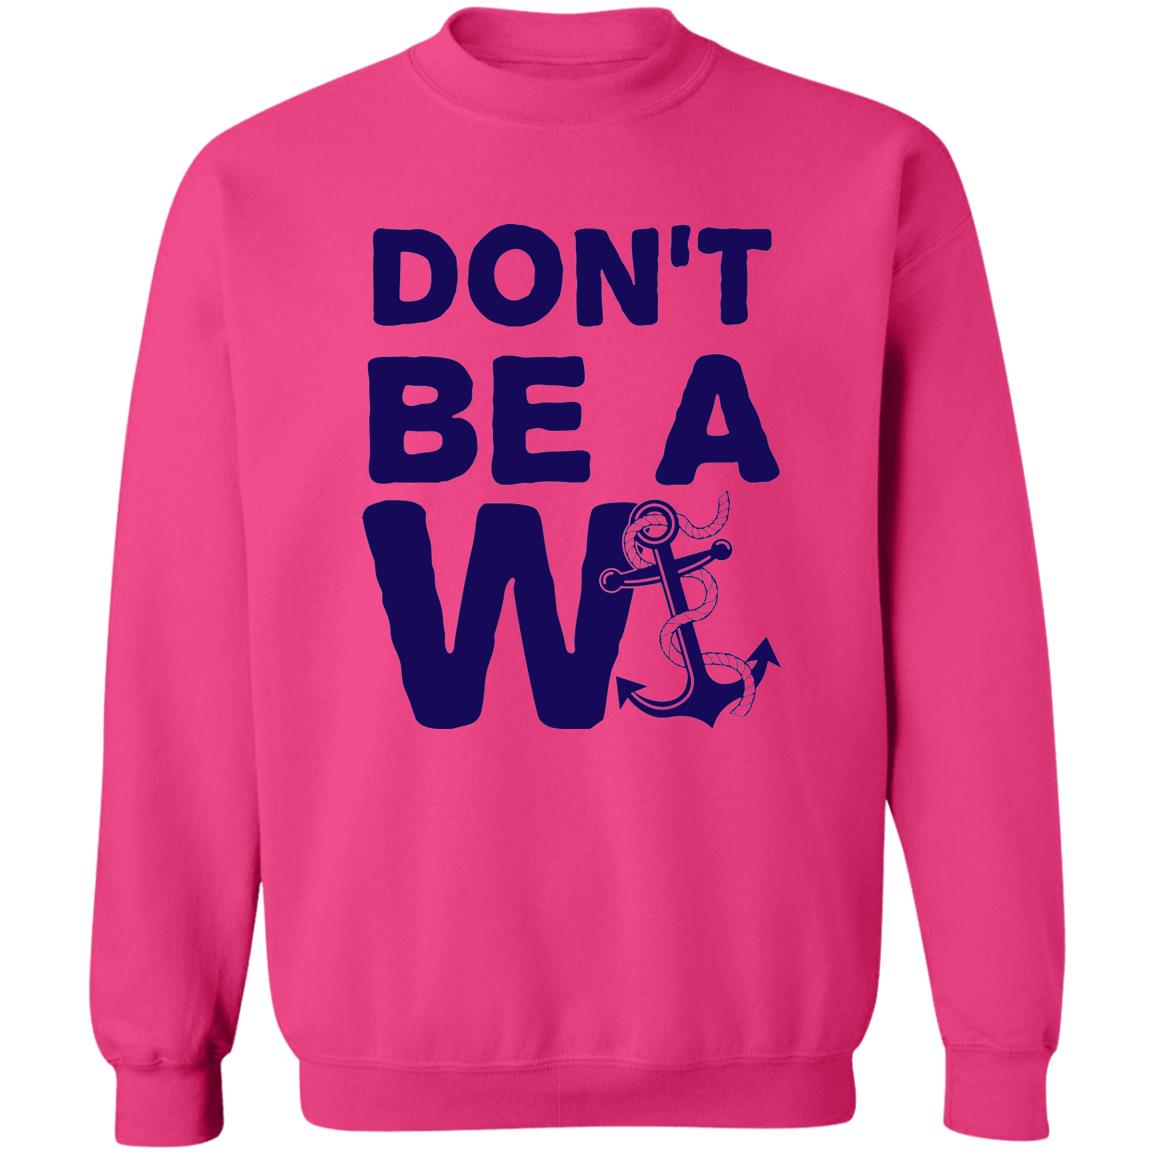 ***2 SIDED***  HRCL FL - Navy Don't Be A Wanker - 2 Sided G180 Crewneck Pullover Sweatshirt